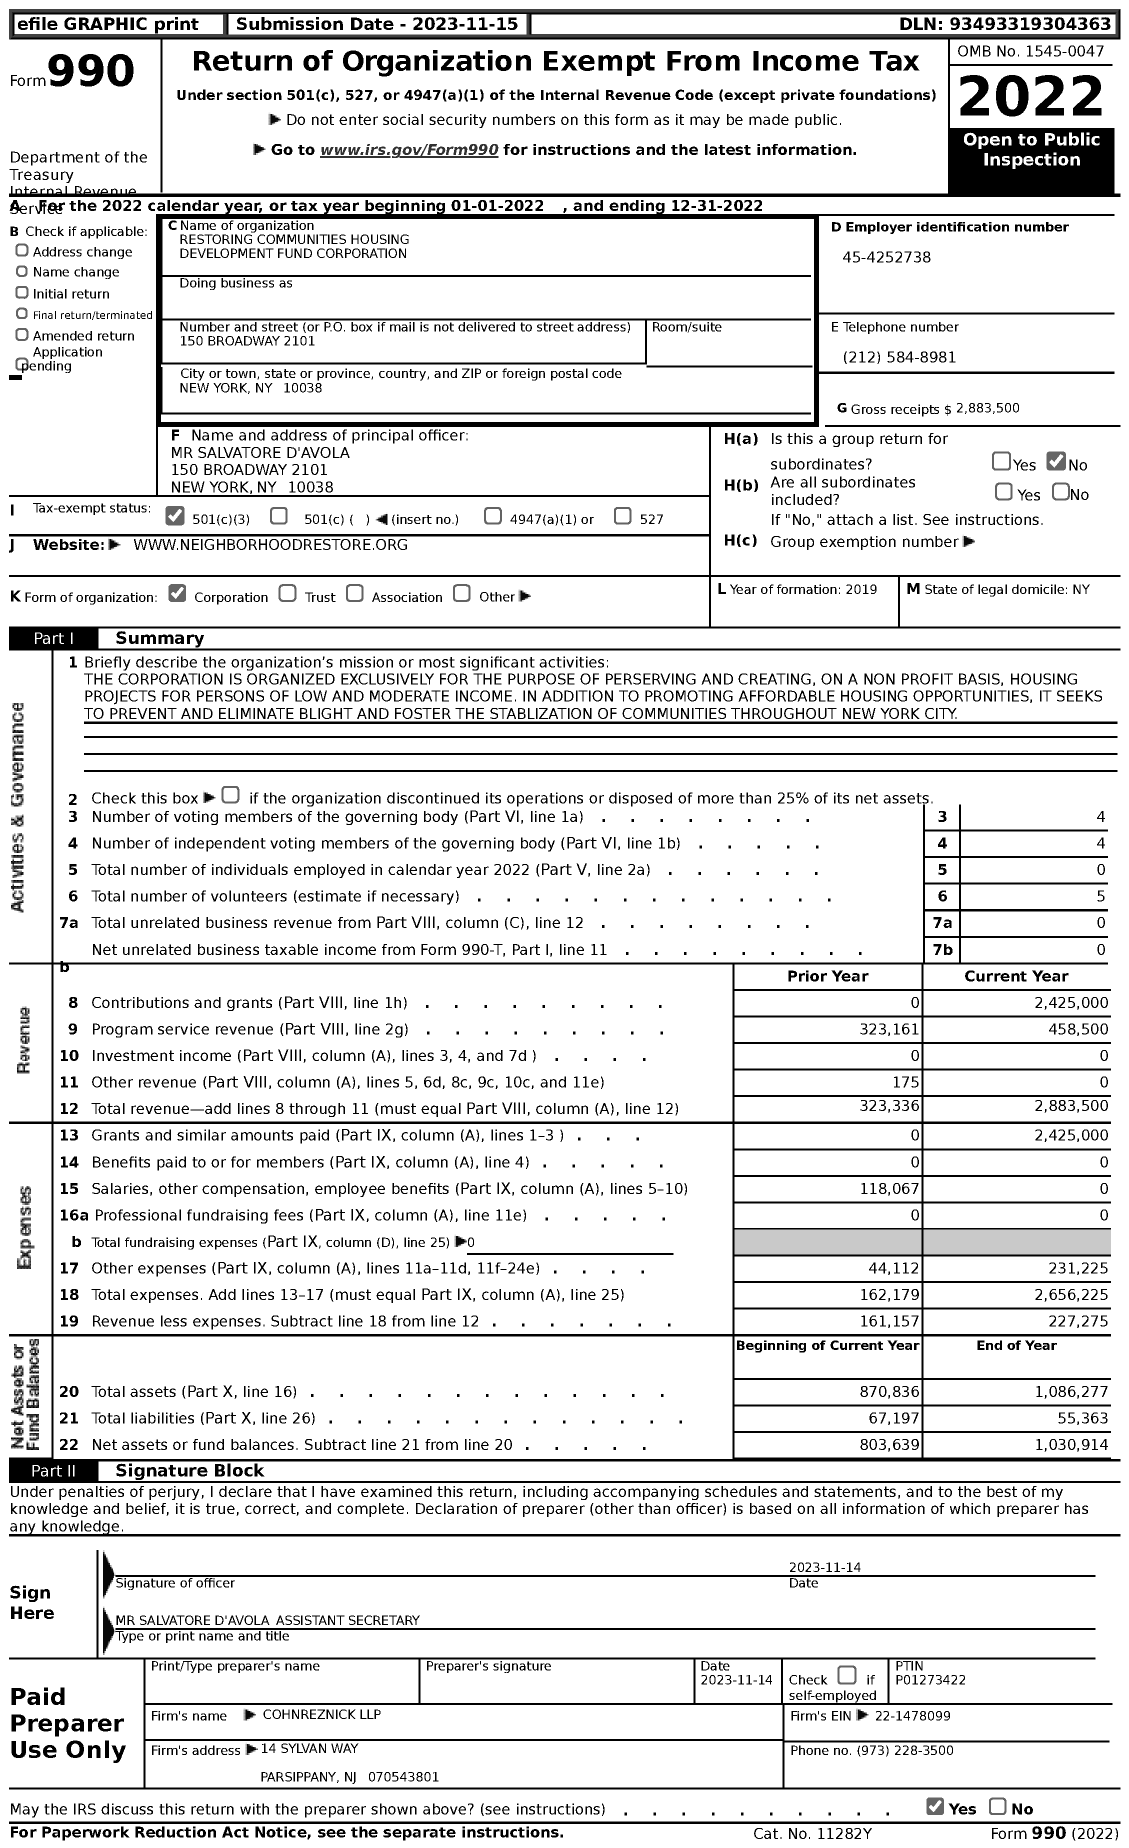 Image of first page of 2022 Form 990 for Restoring Communities Housing Development Fund Corporation